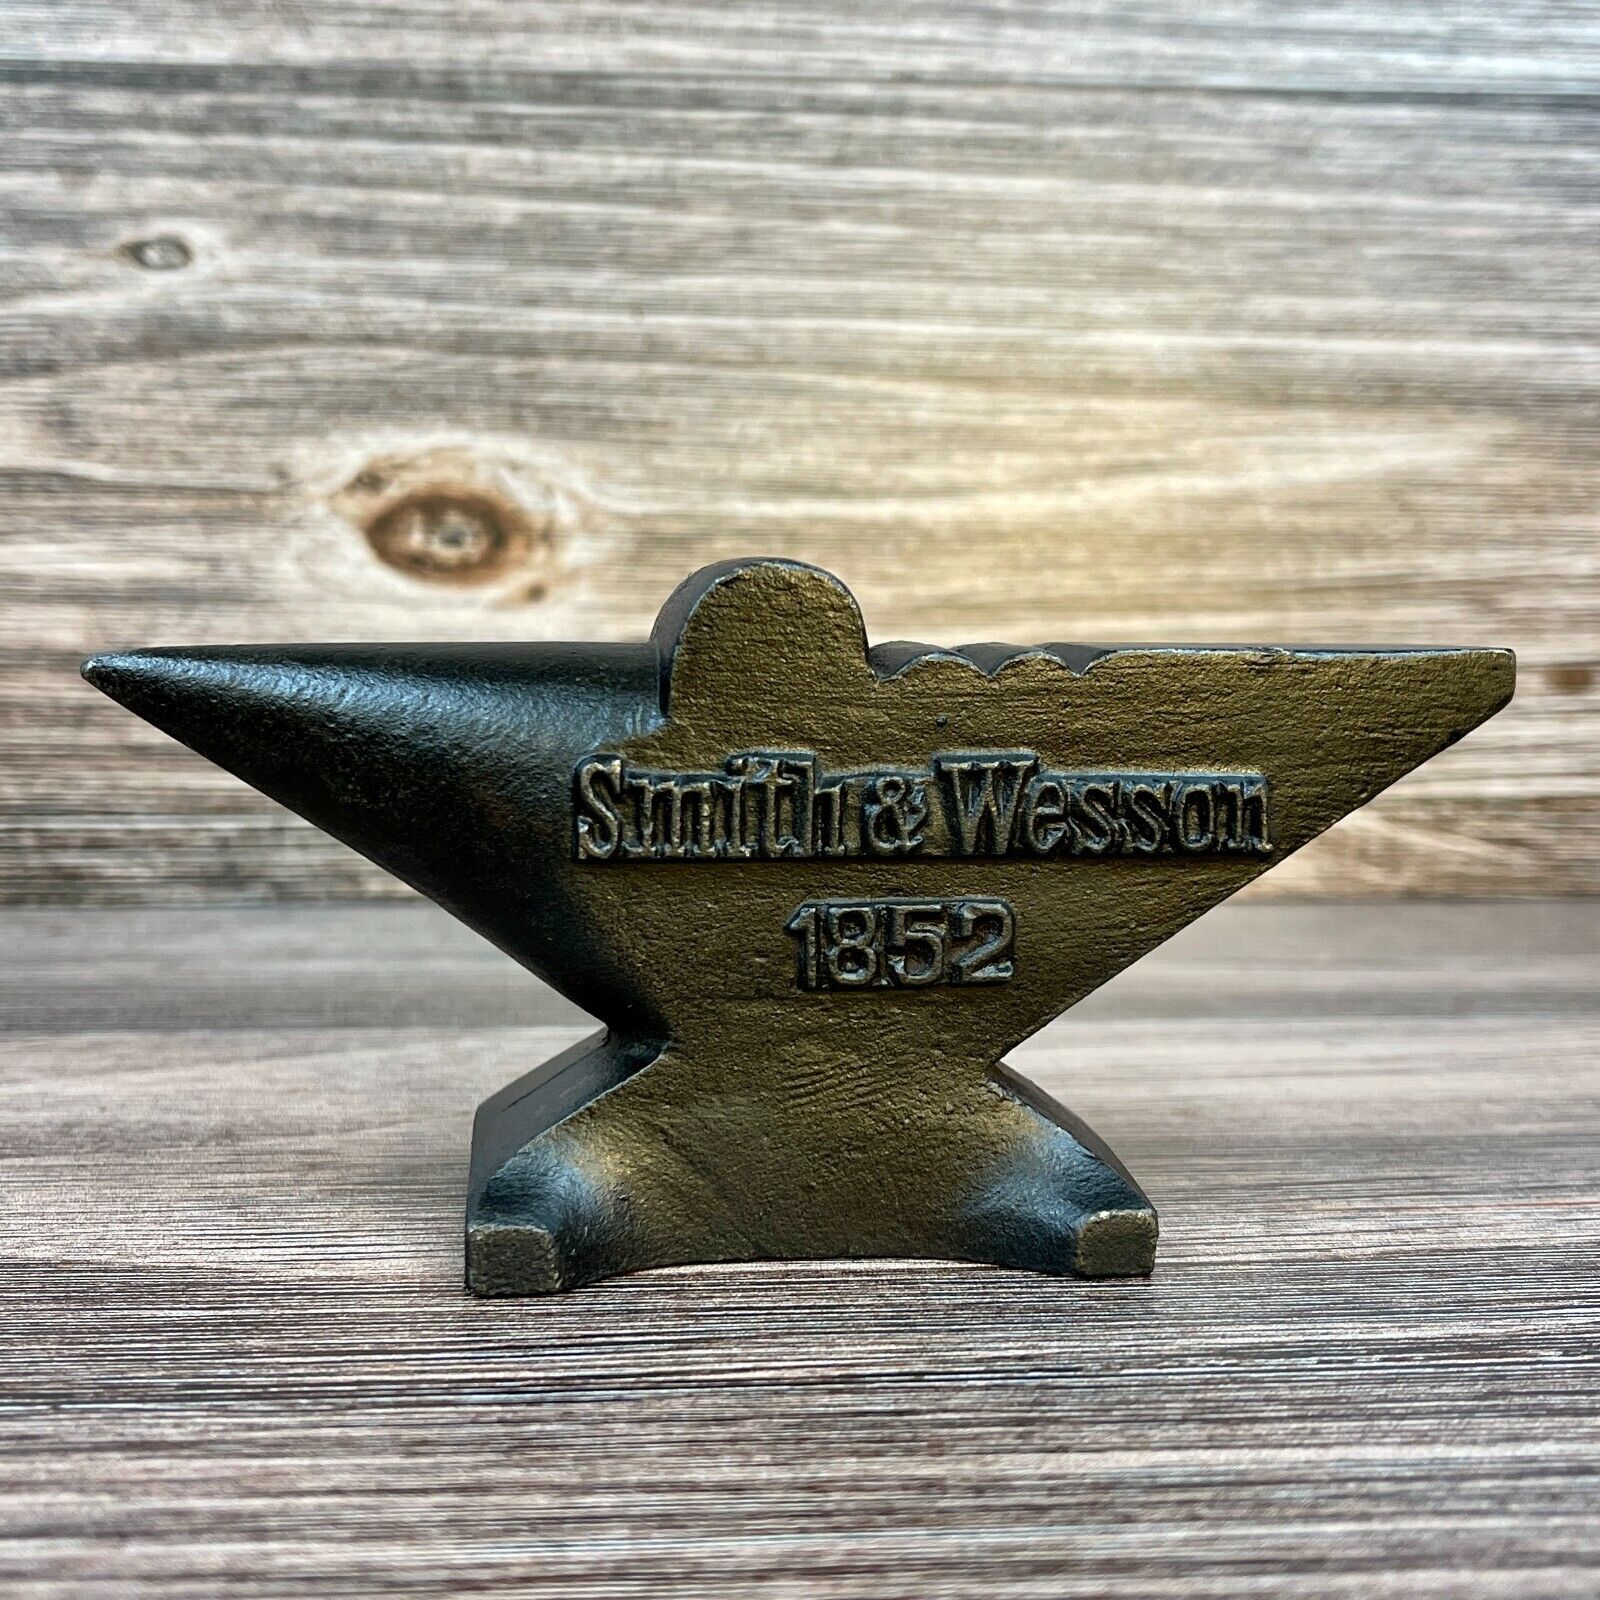 Smith & Wesson 1852 Collectible Anvil Cast Iron W/ Antique Finish 